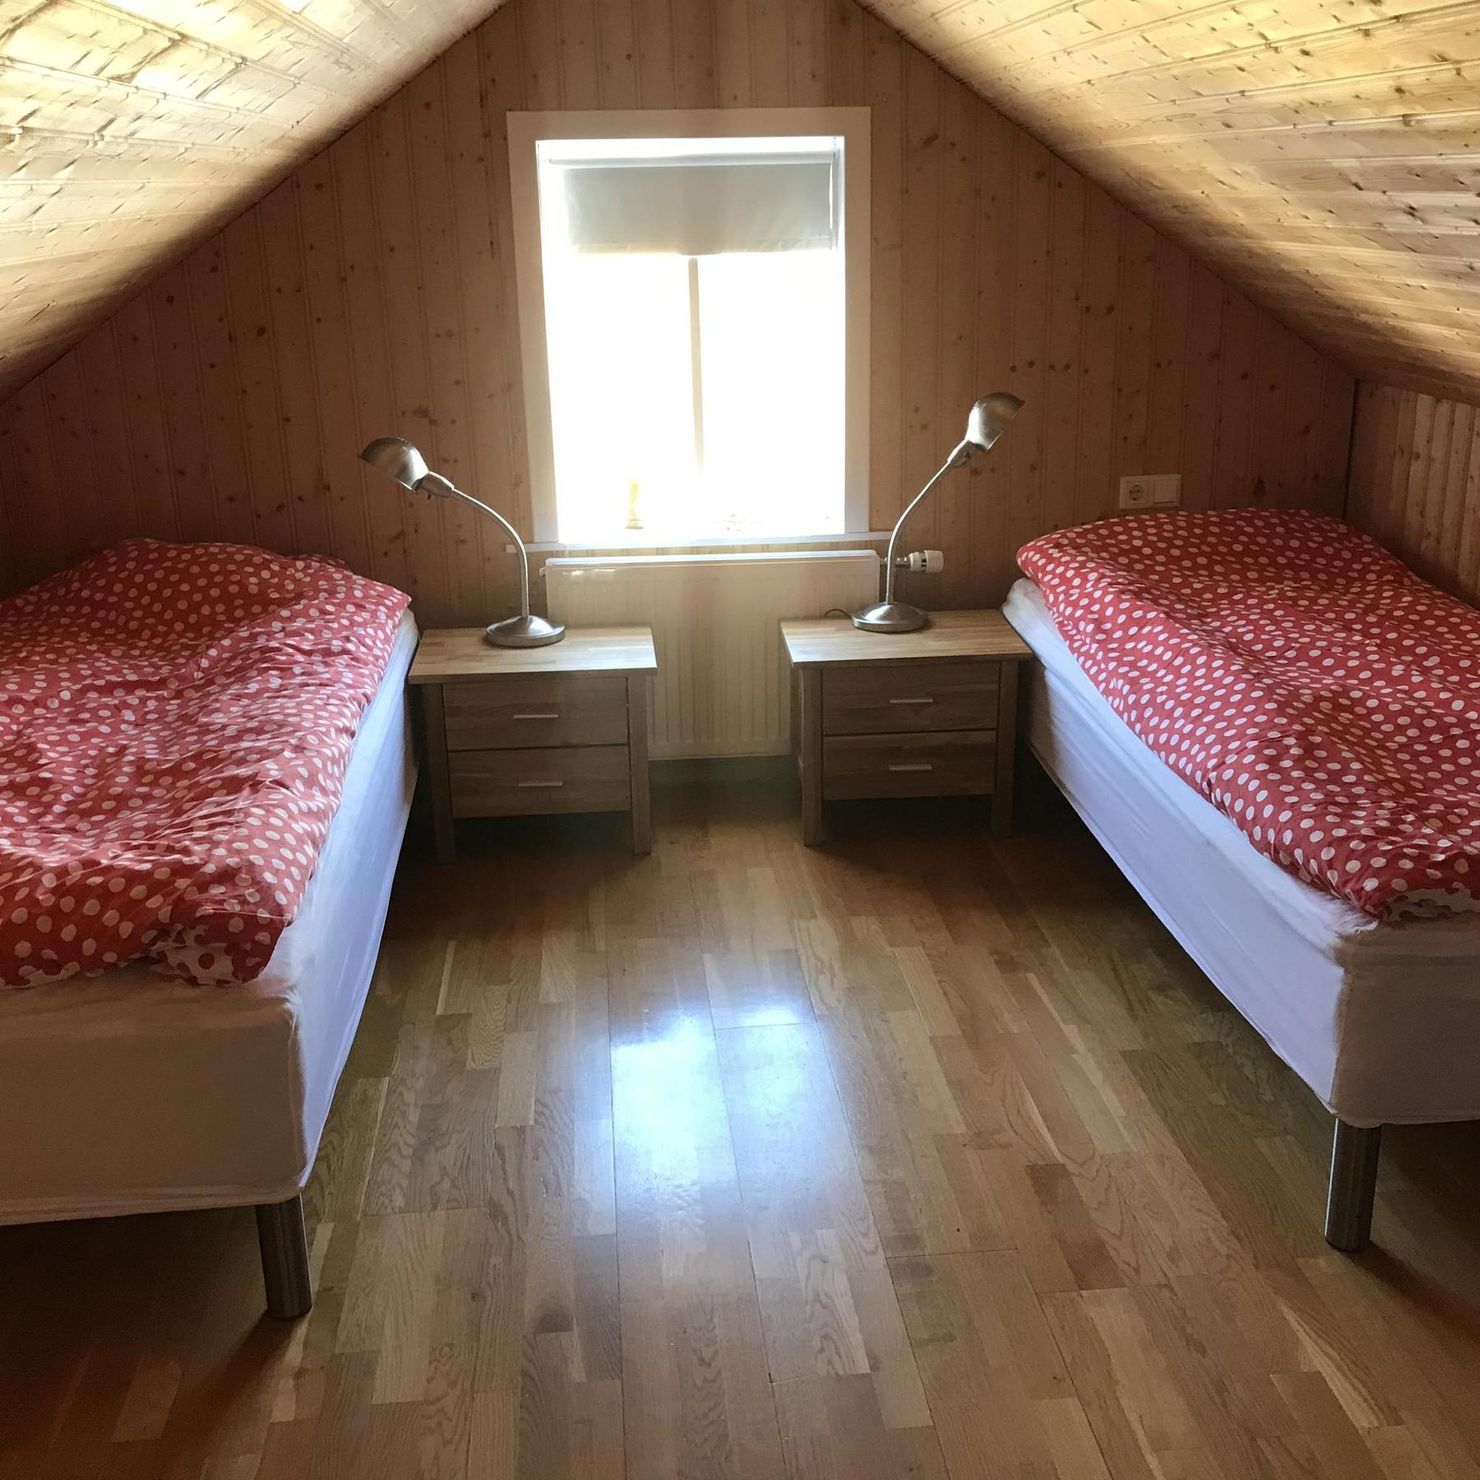 In the attic there is another bedroom with two single beds: perfect for children